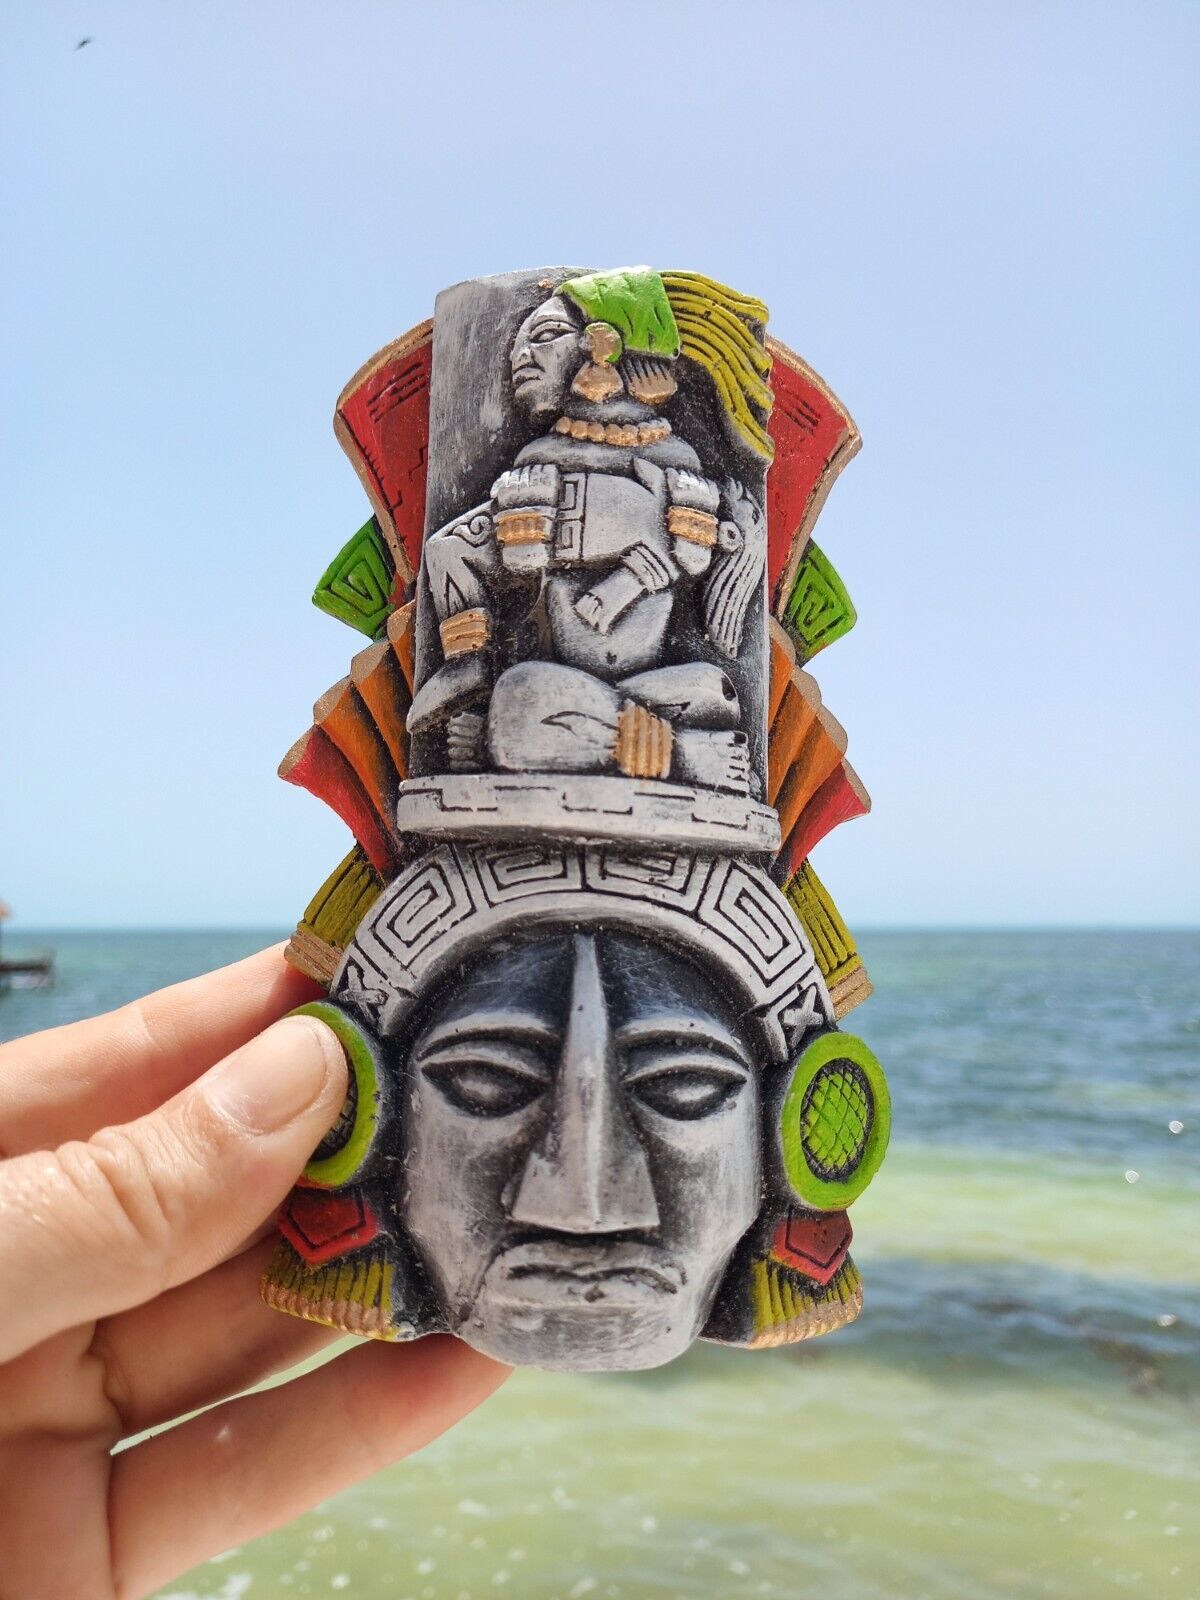 Handcrafted Clay Mayan Mask - Amor Eterno Design for your Friends 5.5-inch